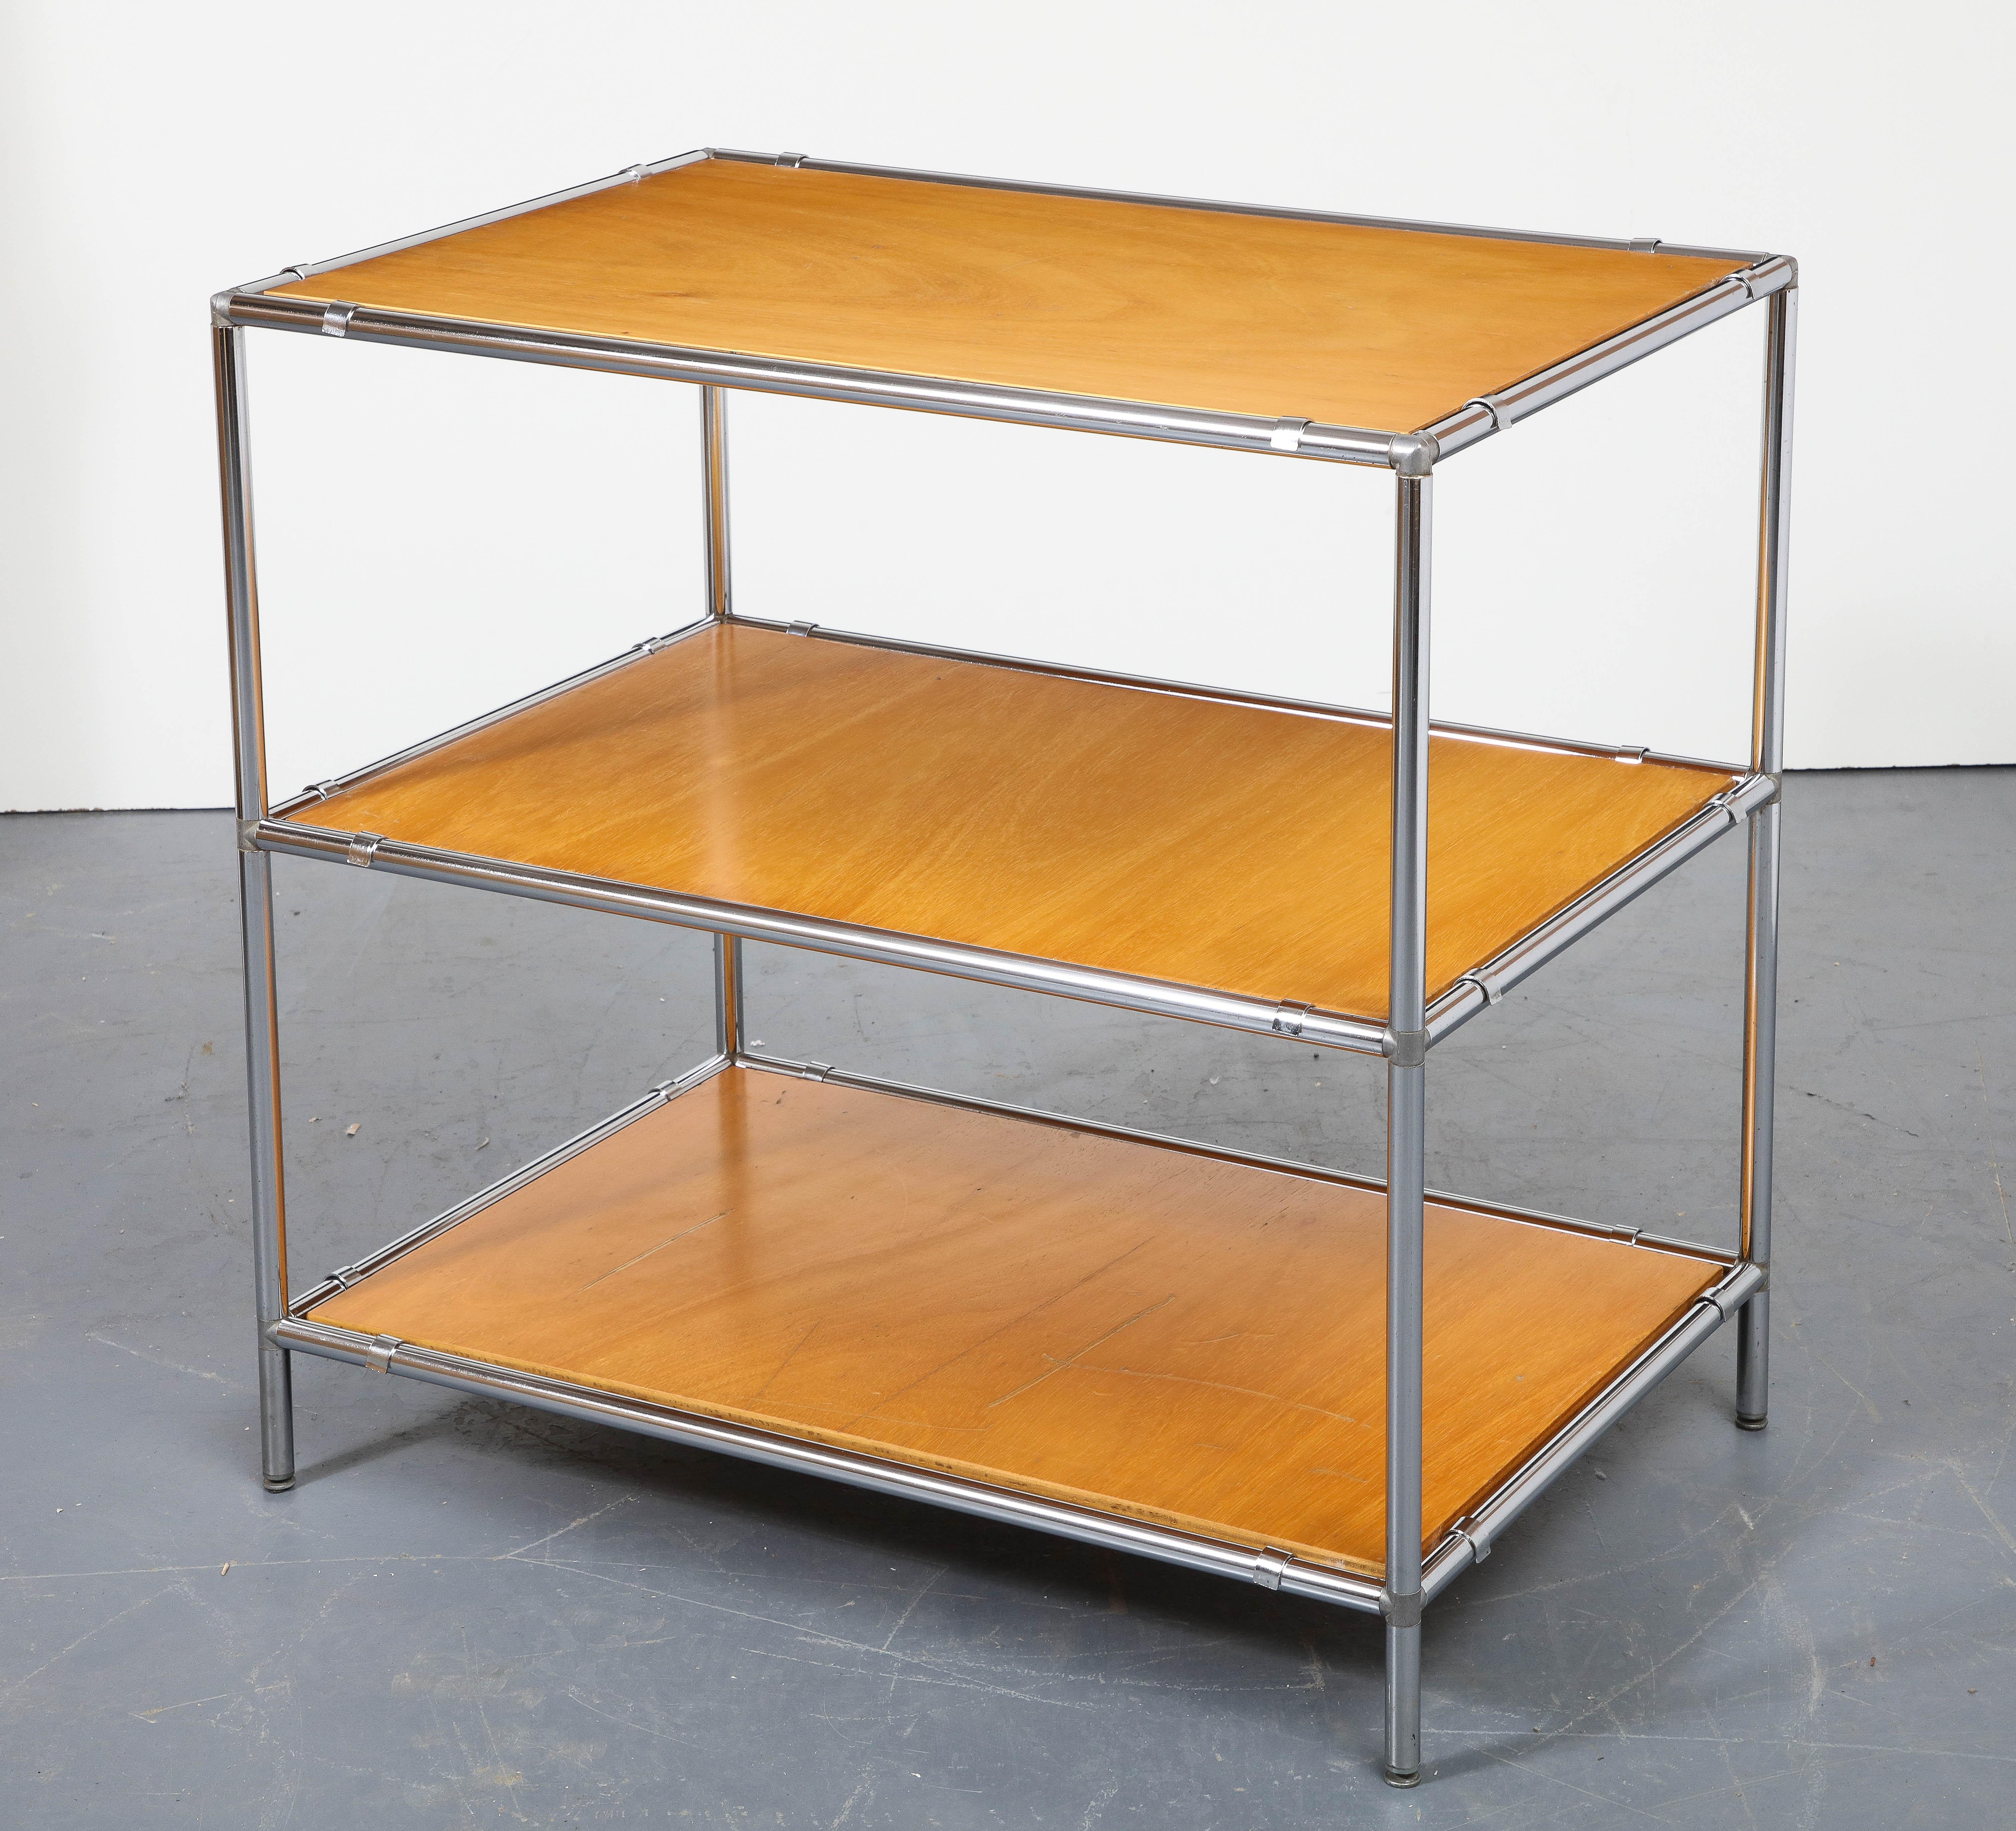 Three-Tier chrome and wood Etagere, Italy, 20th century. 

Sleek etagere consists of a tubular chrome frame and three tiers of wooden shelves.